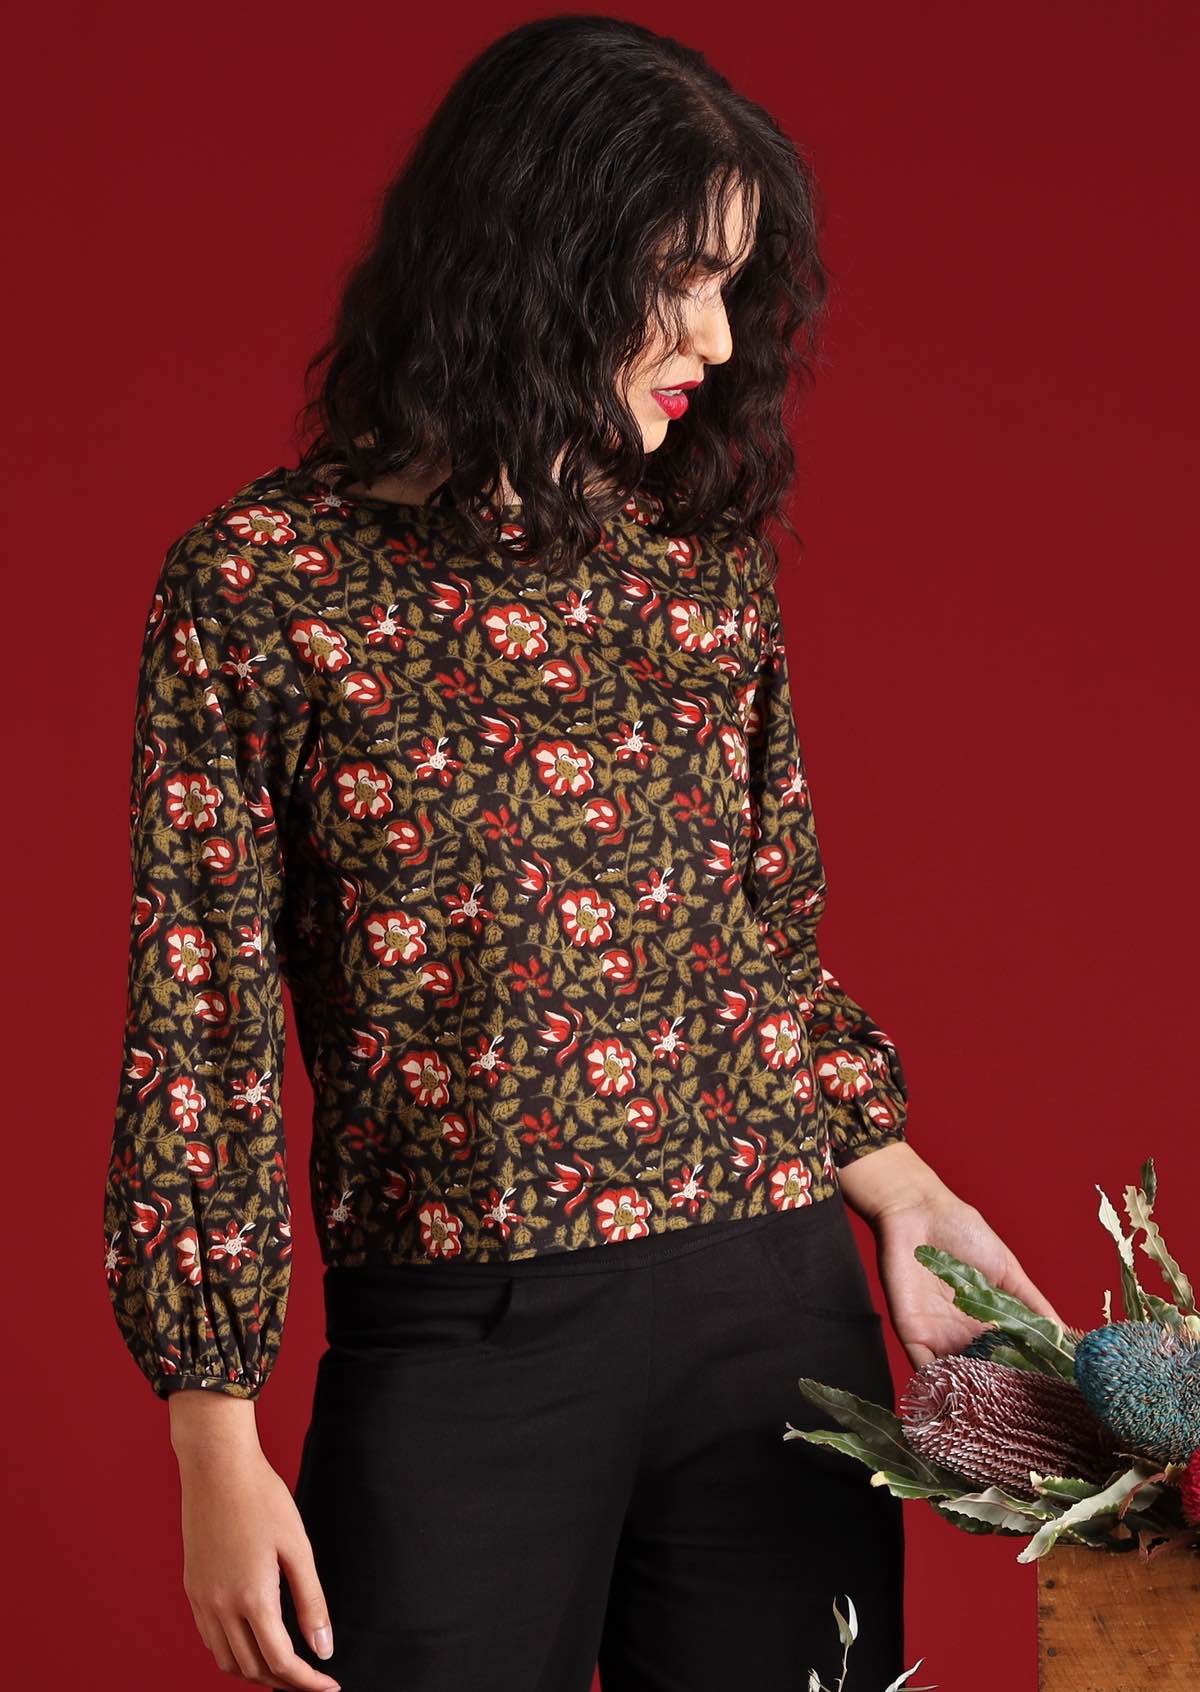 Model with dark hair and red lipstick in Isla Top Wild Rose floral cotton boho top